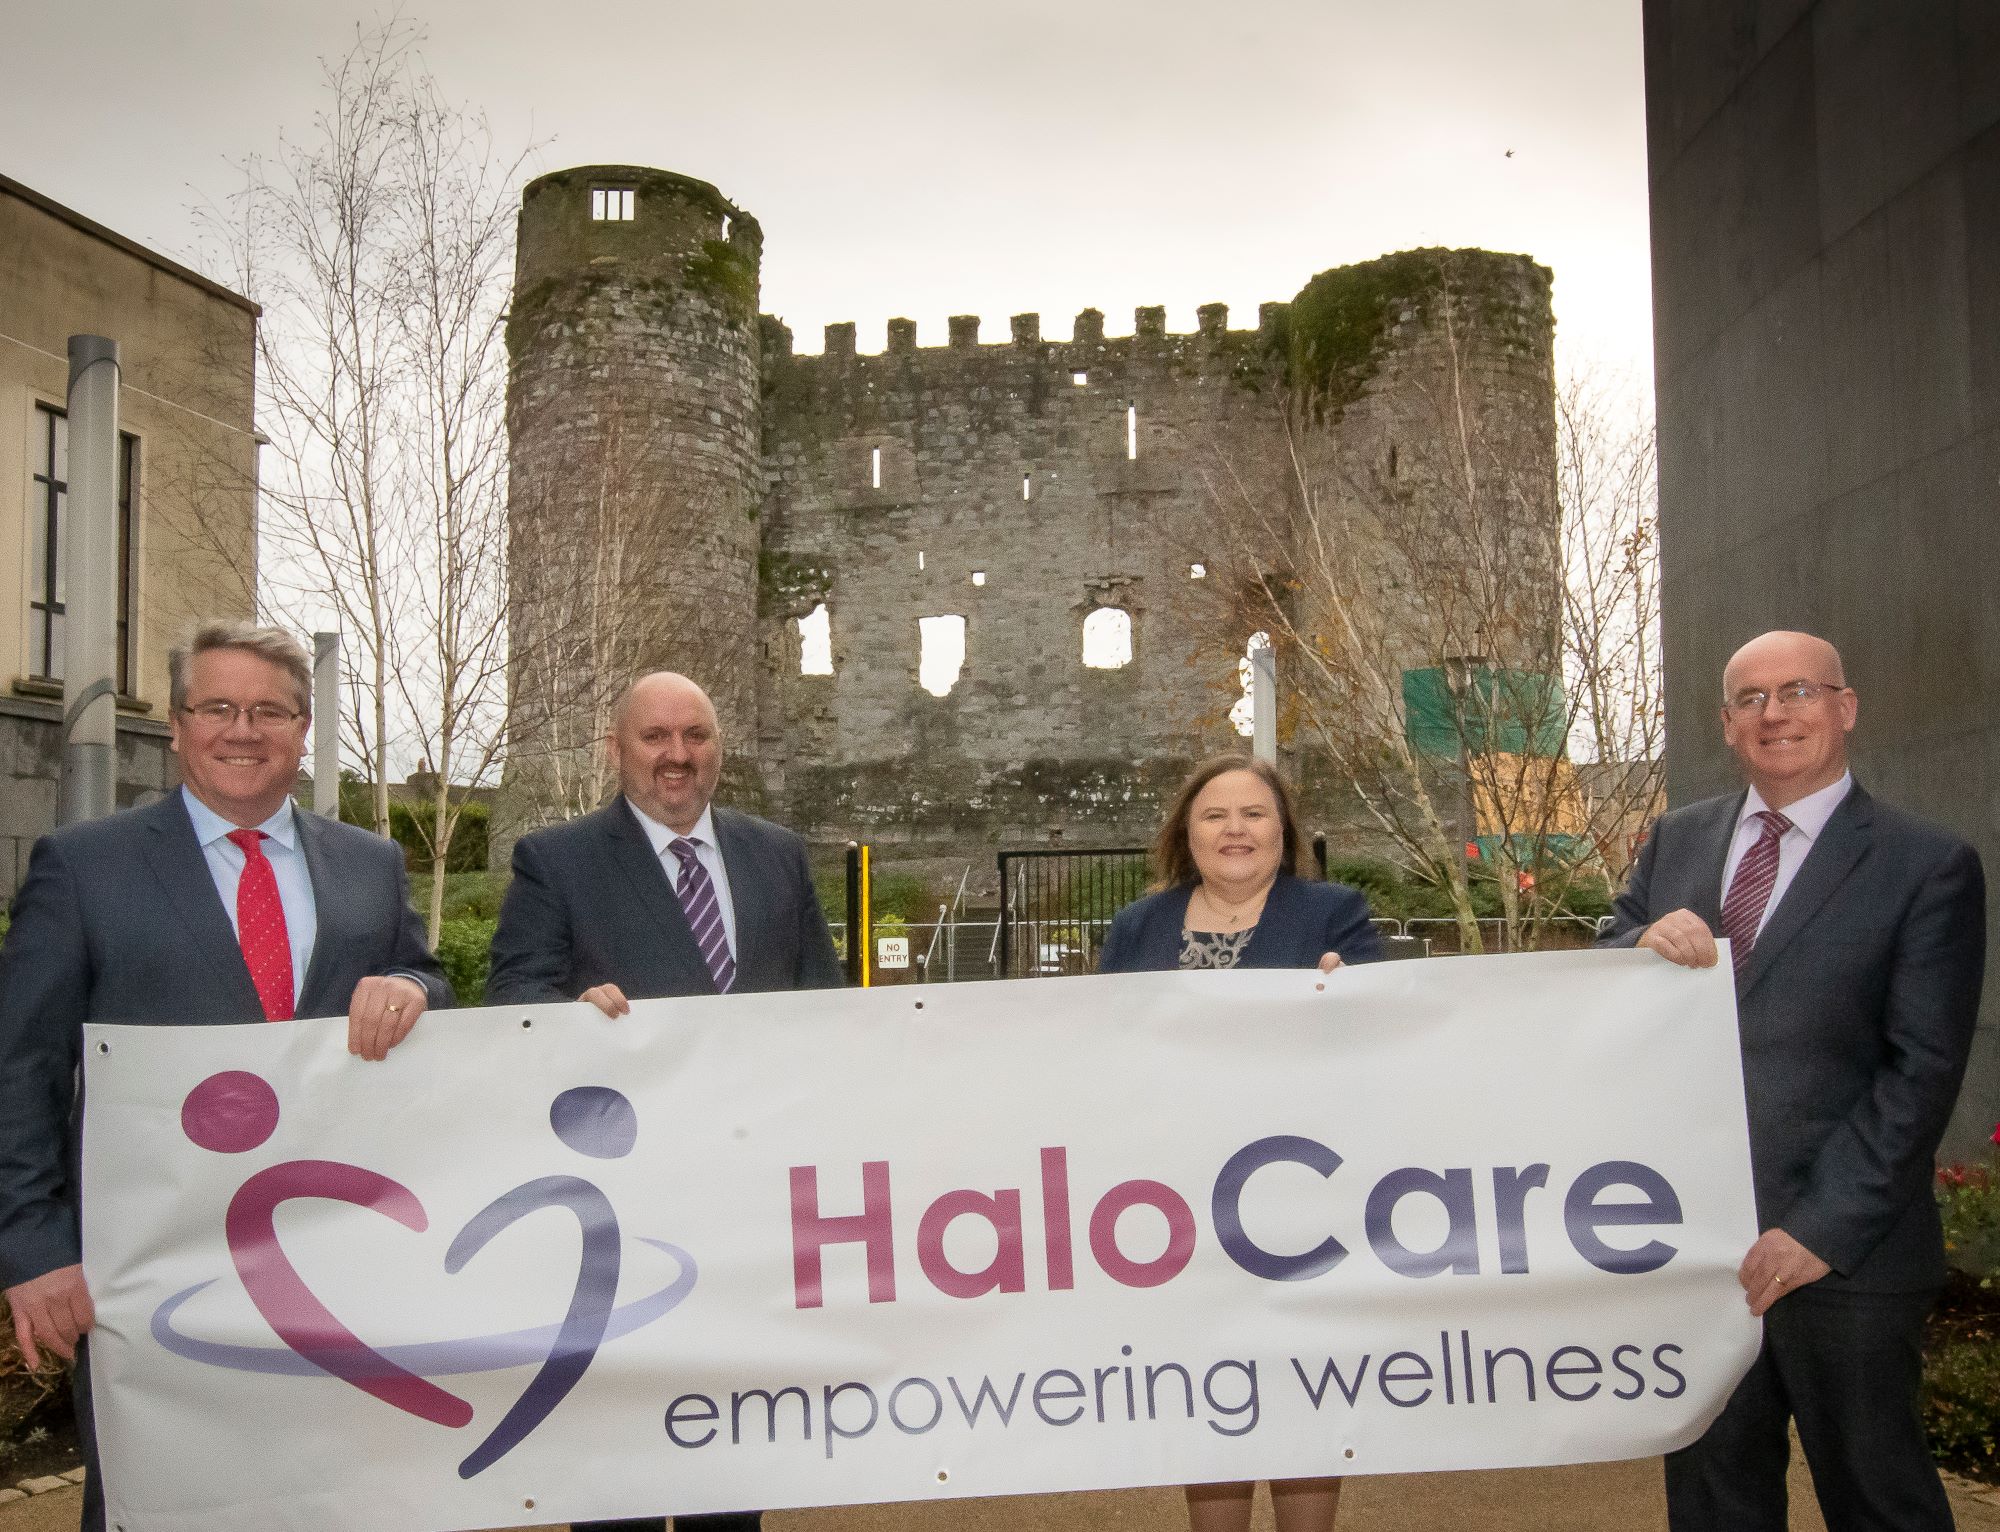 20 jobs created immediately in Carlow by Halo Care